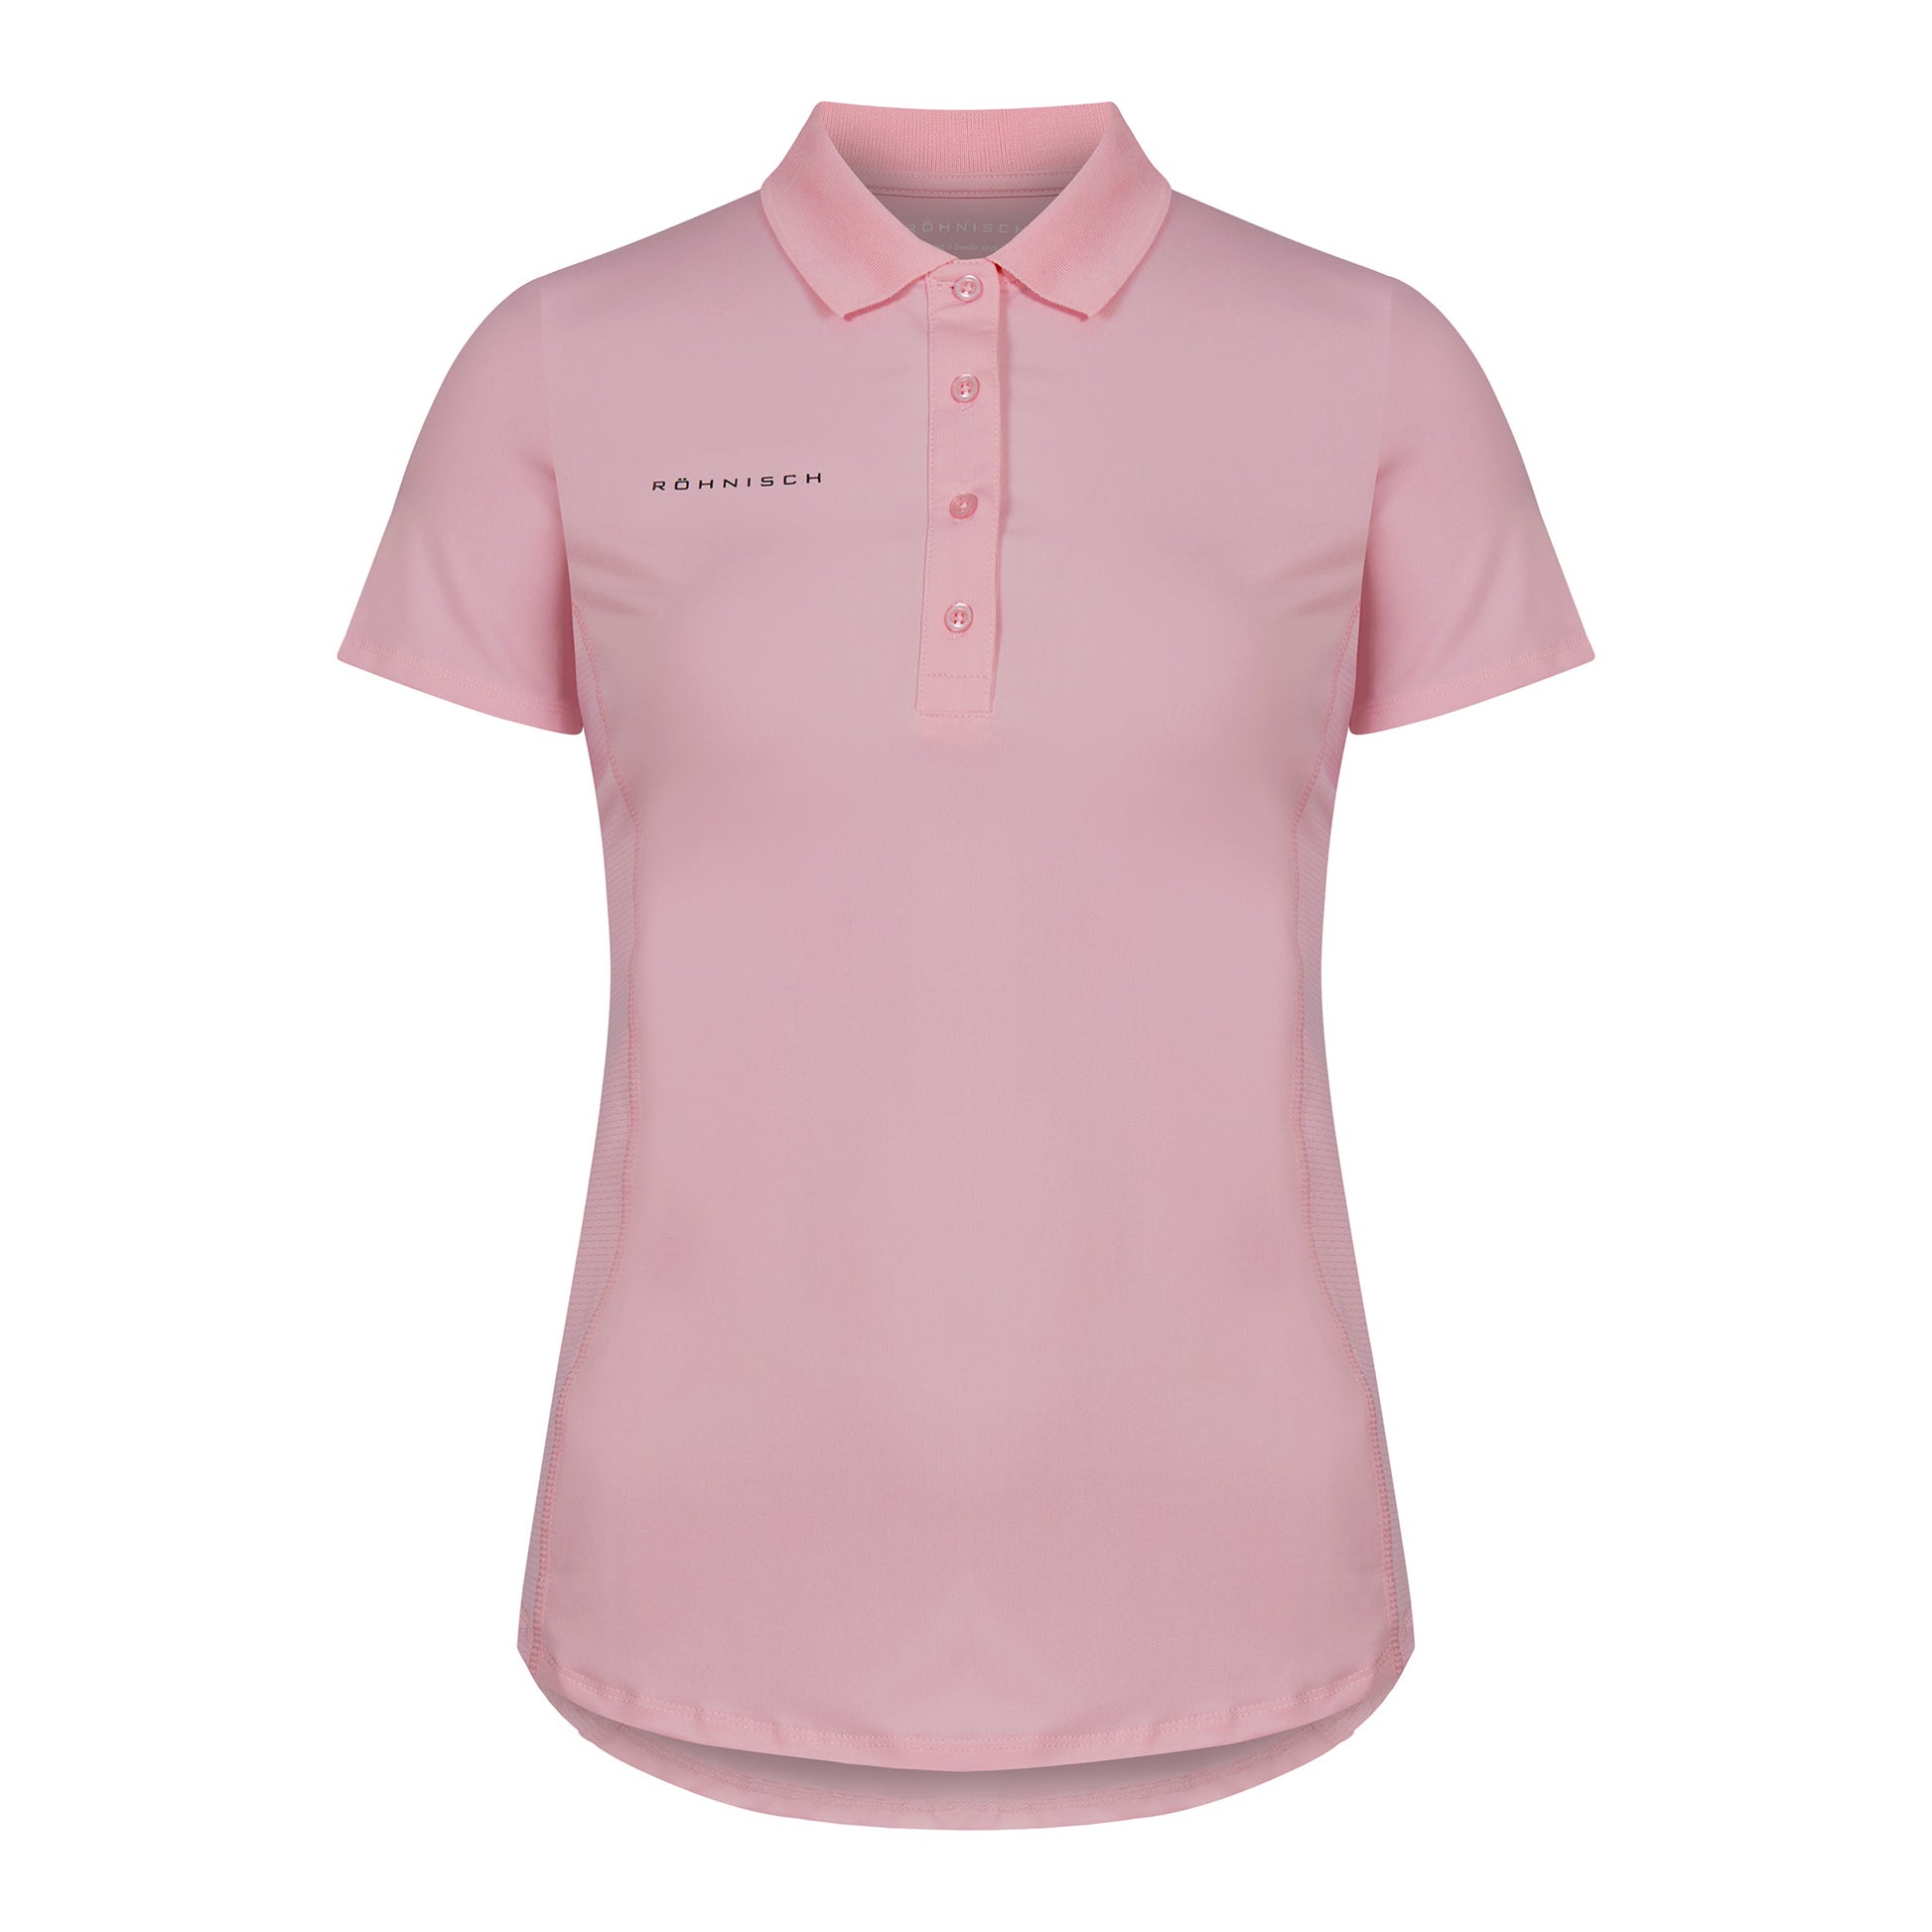 Rohnisch Women's Short Sleeve Polo with Textured Panels in Orchid Pink